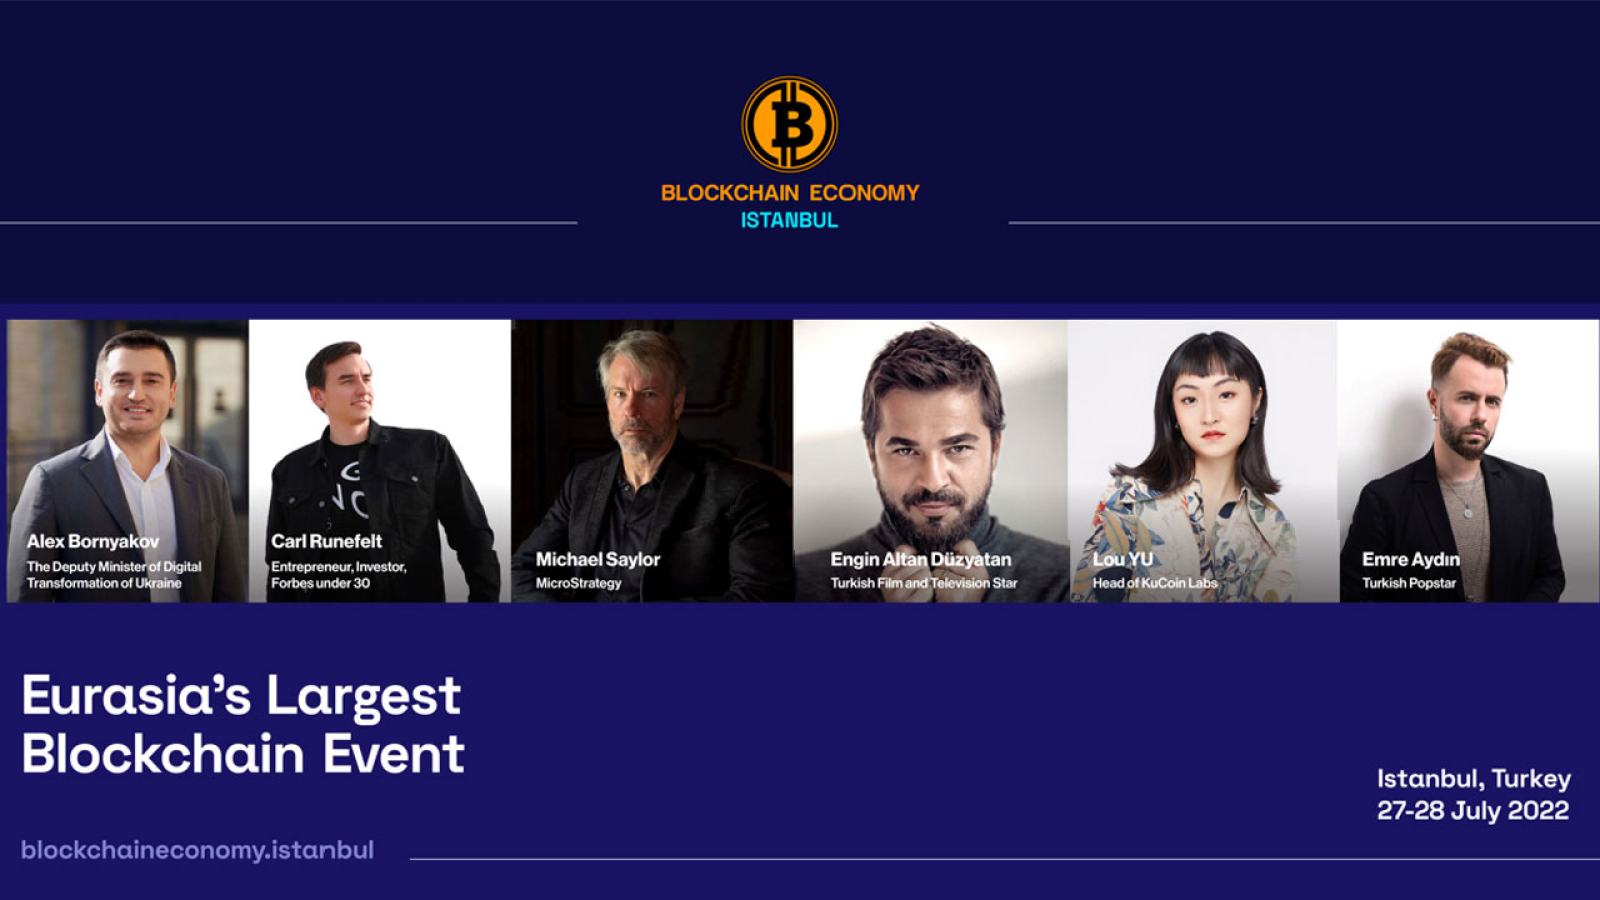 Blockchain Economy Istanbul Makes Grand Impact with the Top Names